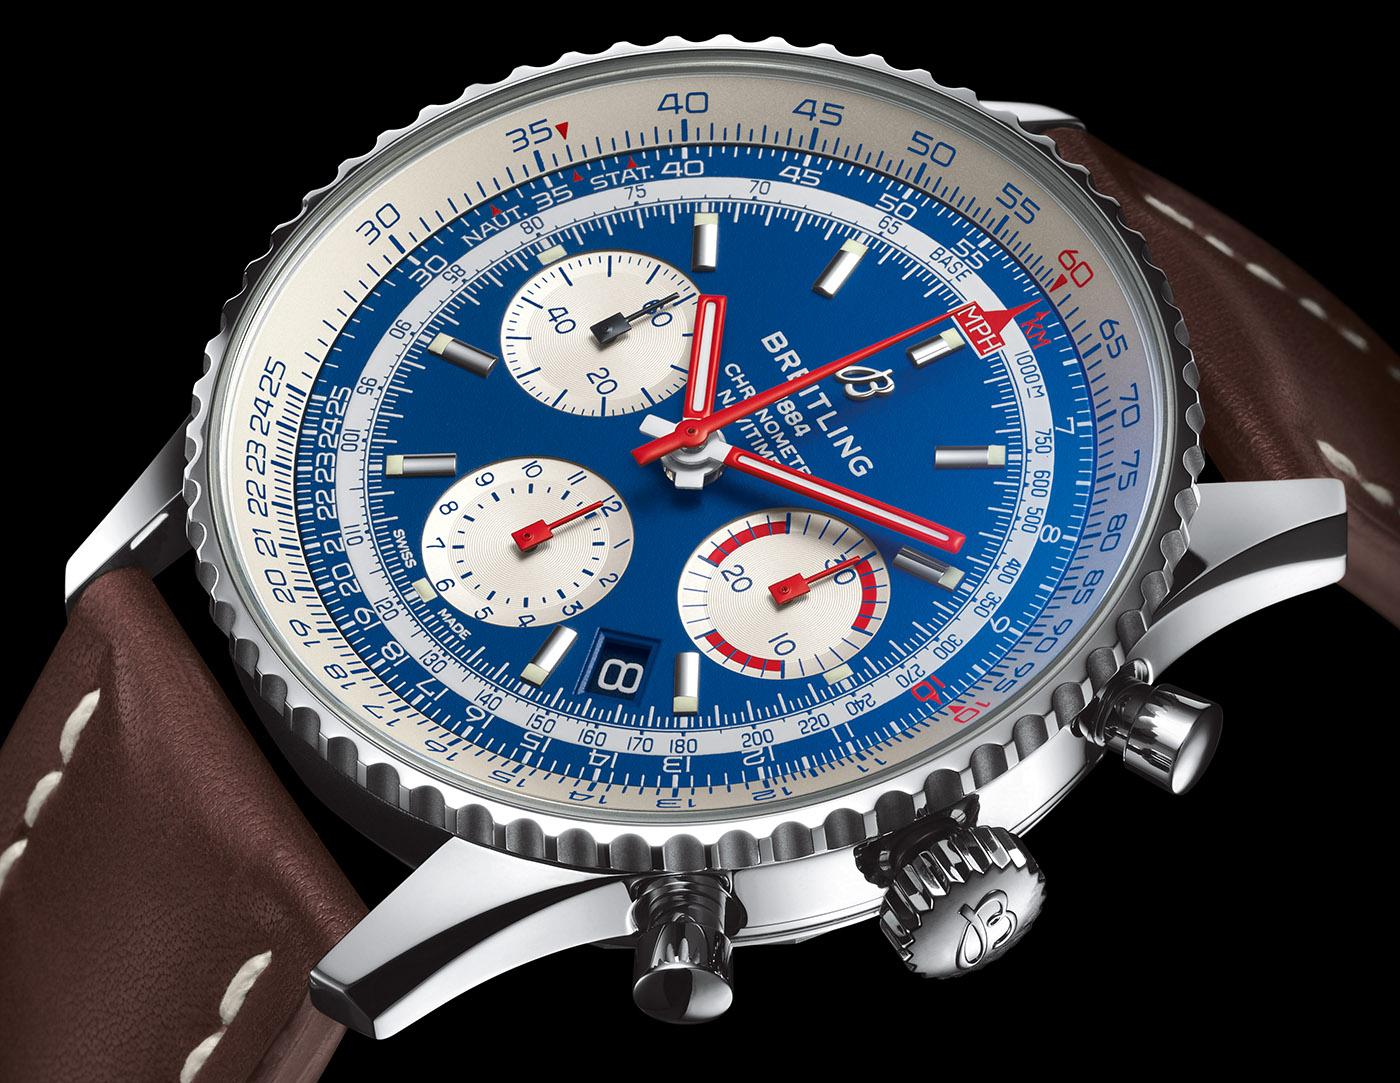 Breitling Navitimer B01 Chronograph 43 American Airlines